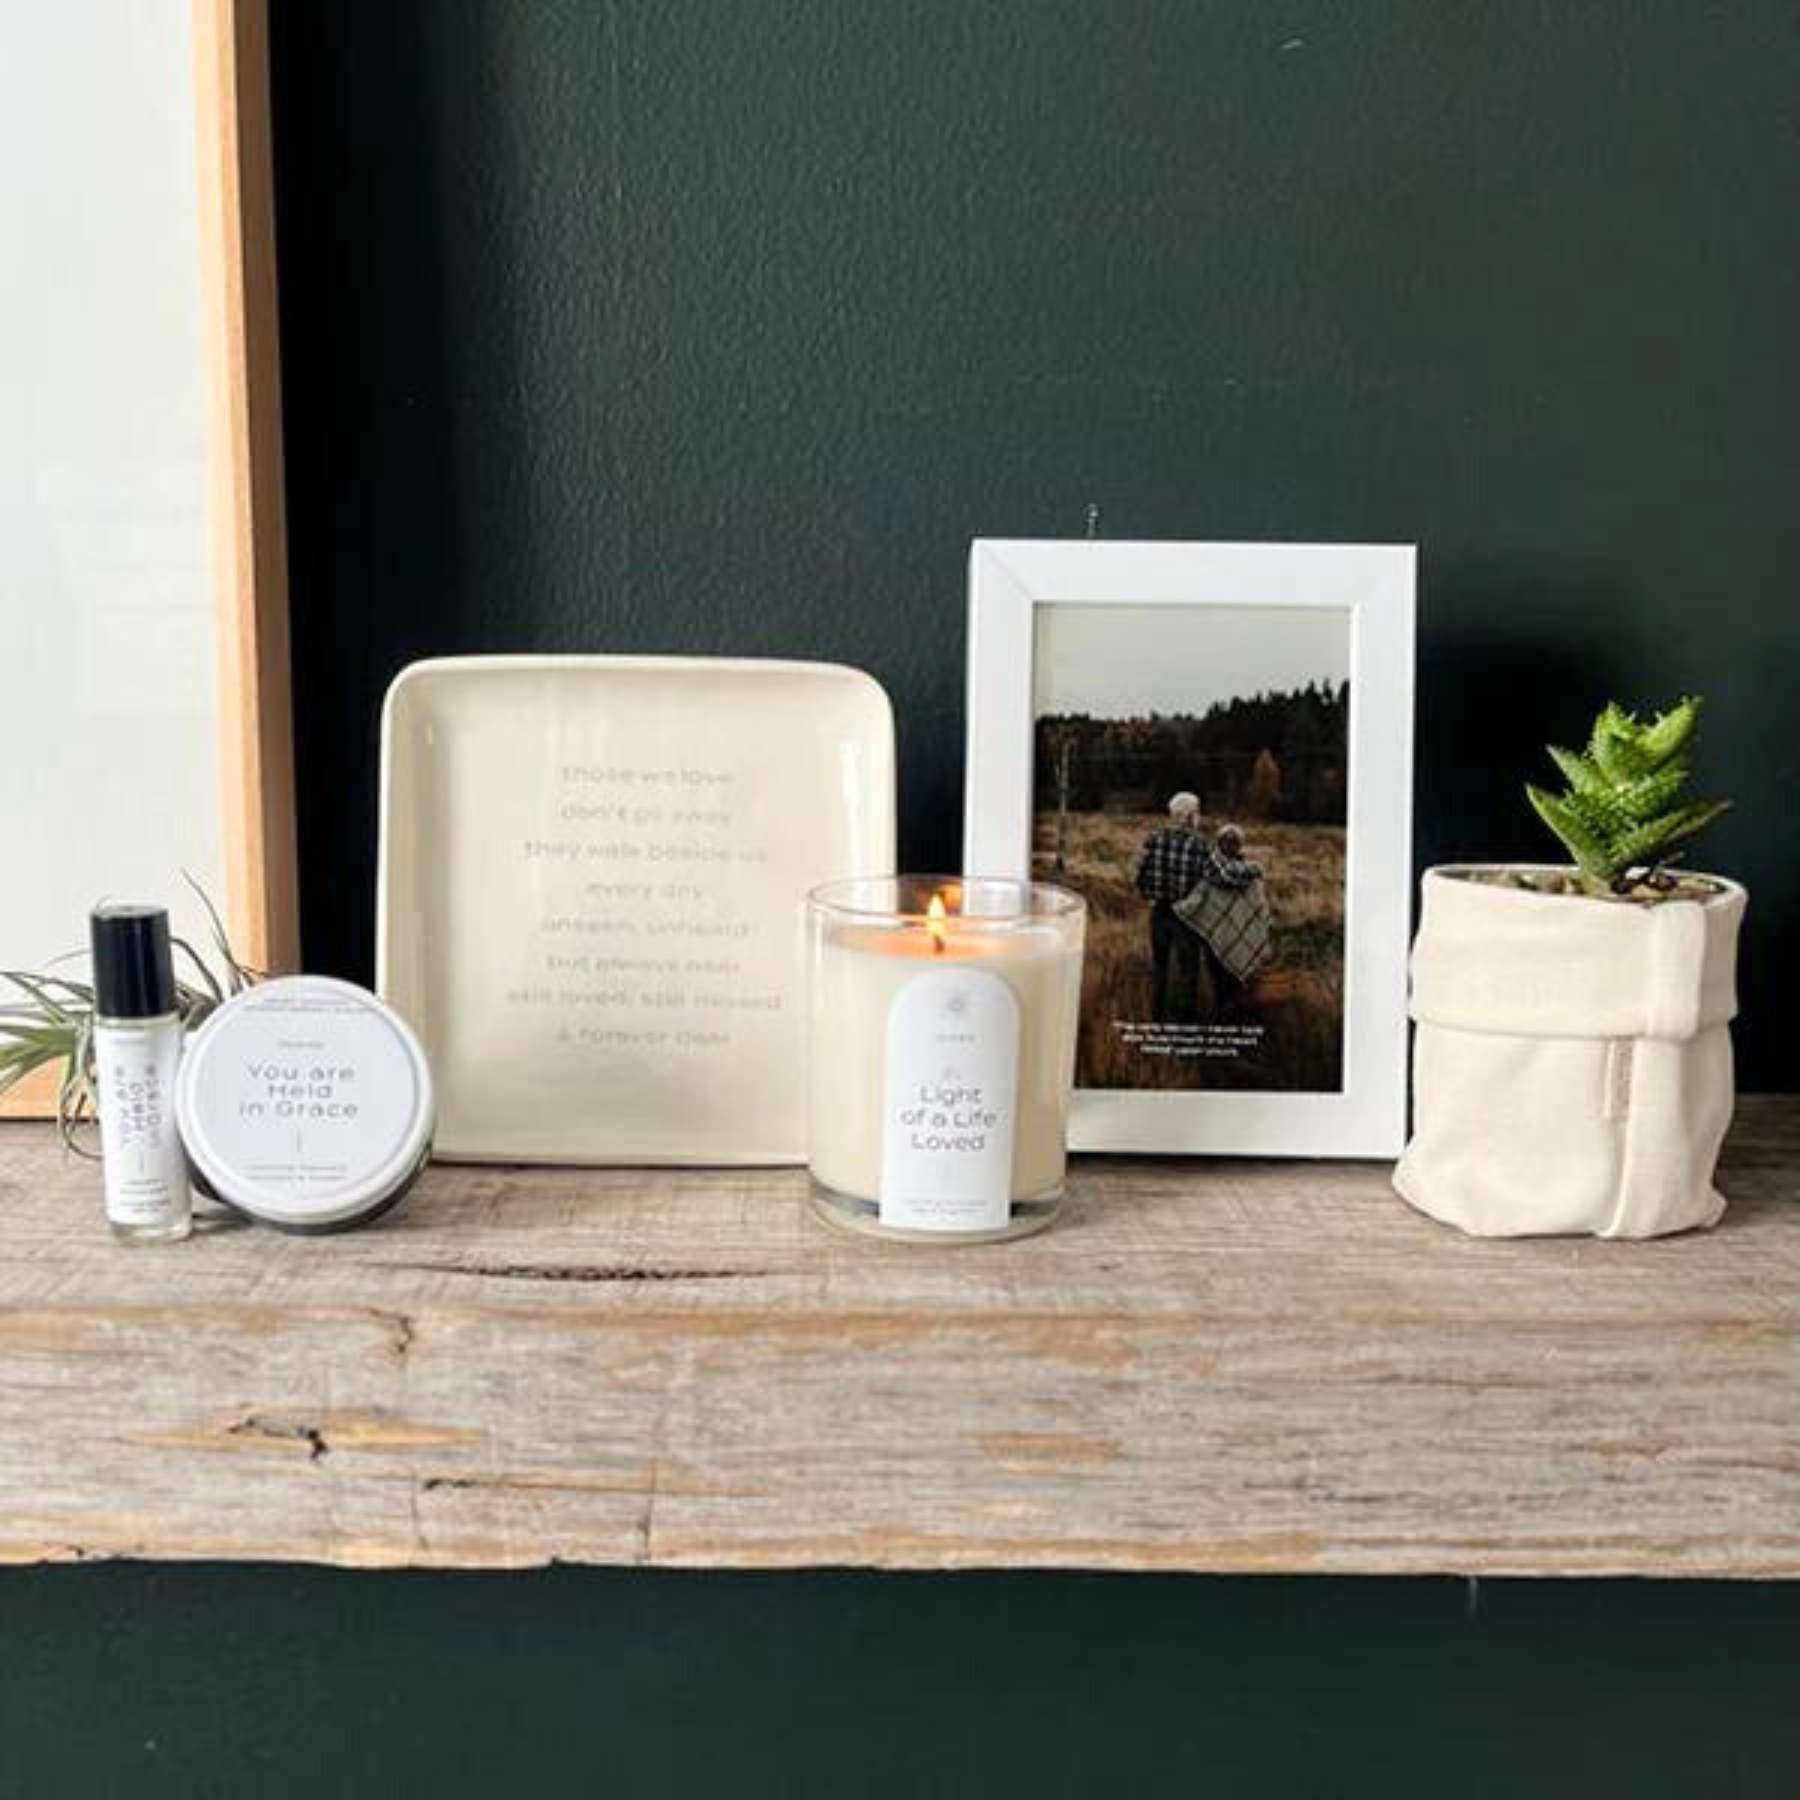 Stylish home ambiance set with LACUNA Frame featuring a peaceful countryside photograph, scented candle, and green plant, curated by Fabulous Flowers and Gifts for a warm, inviting home atmosphere.